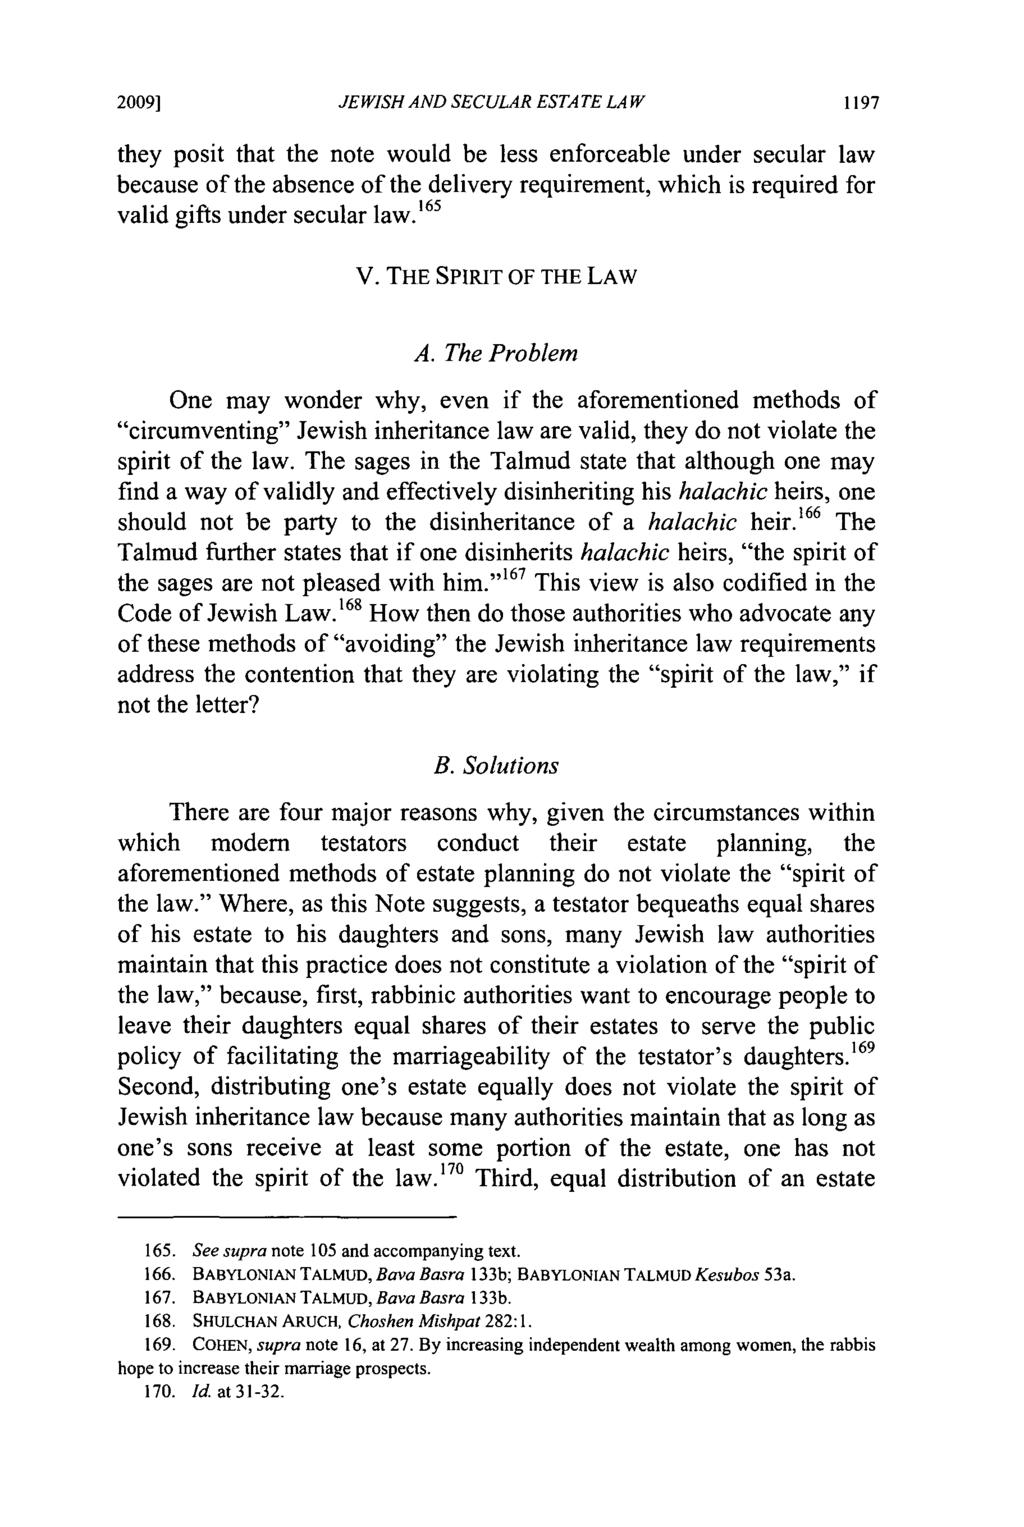 Wolf: Resolving the Conflict Between Jewish and Secular Estate Law 2009] JEWISH AND SECULAR ESTATE LAW they posit that the note would be less enforceable under secular law because of the absence of